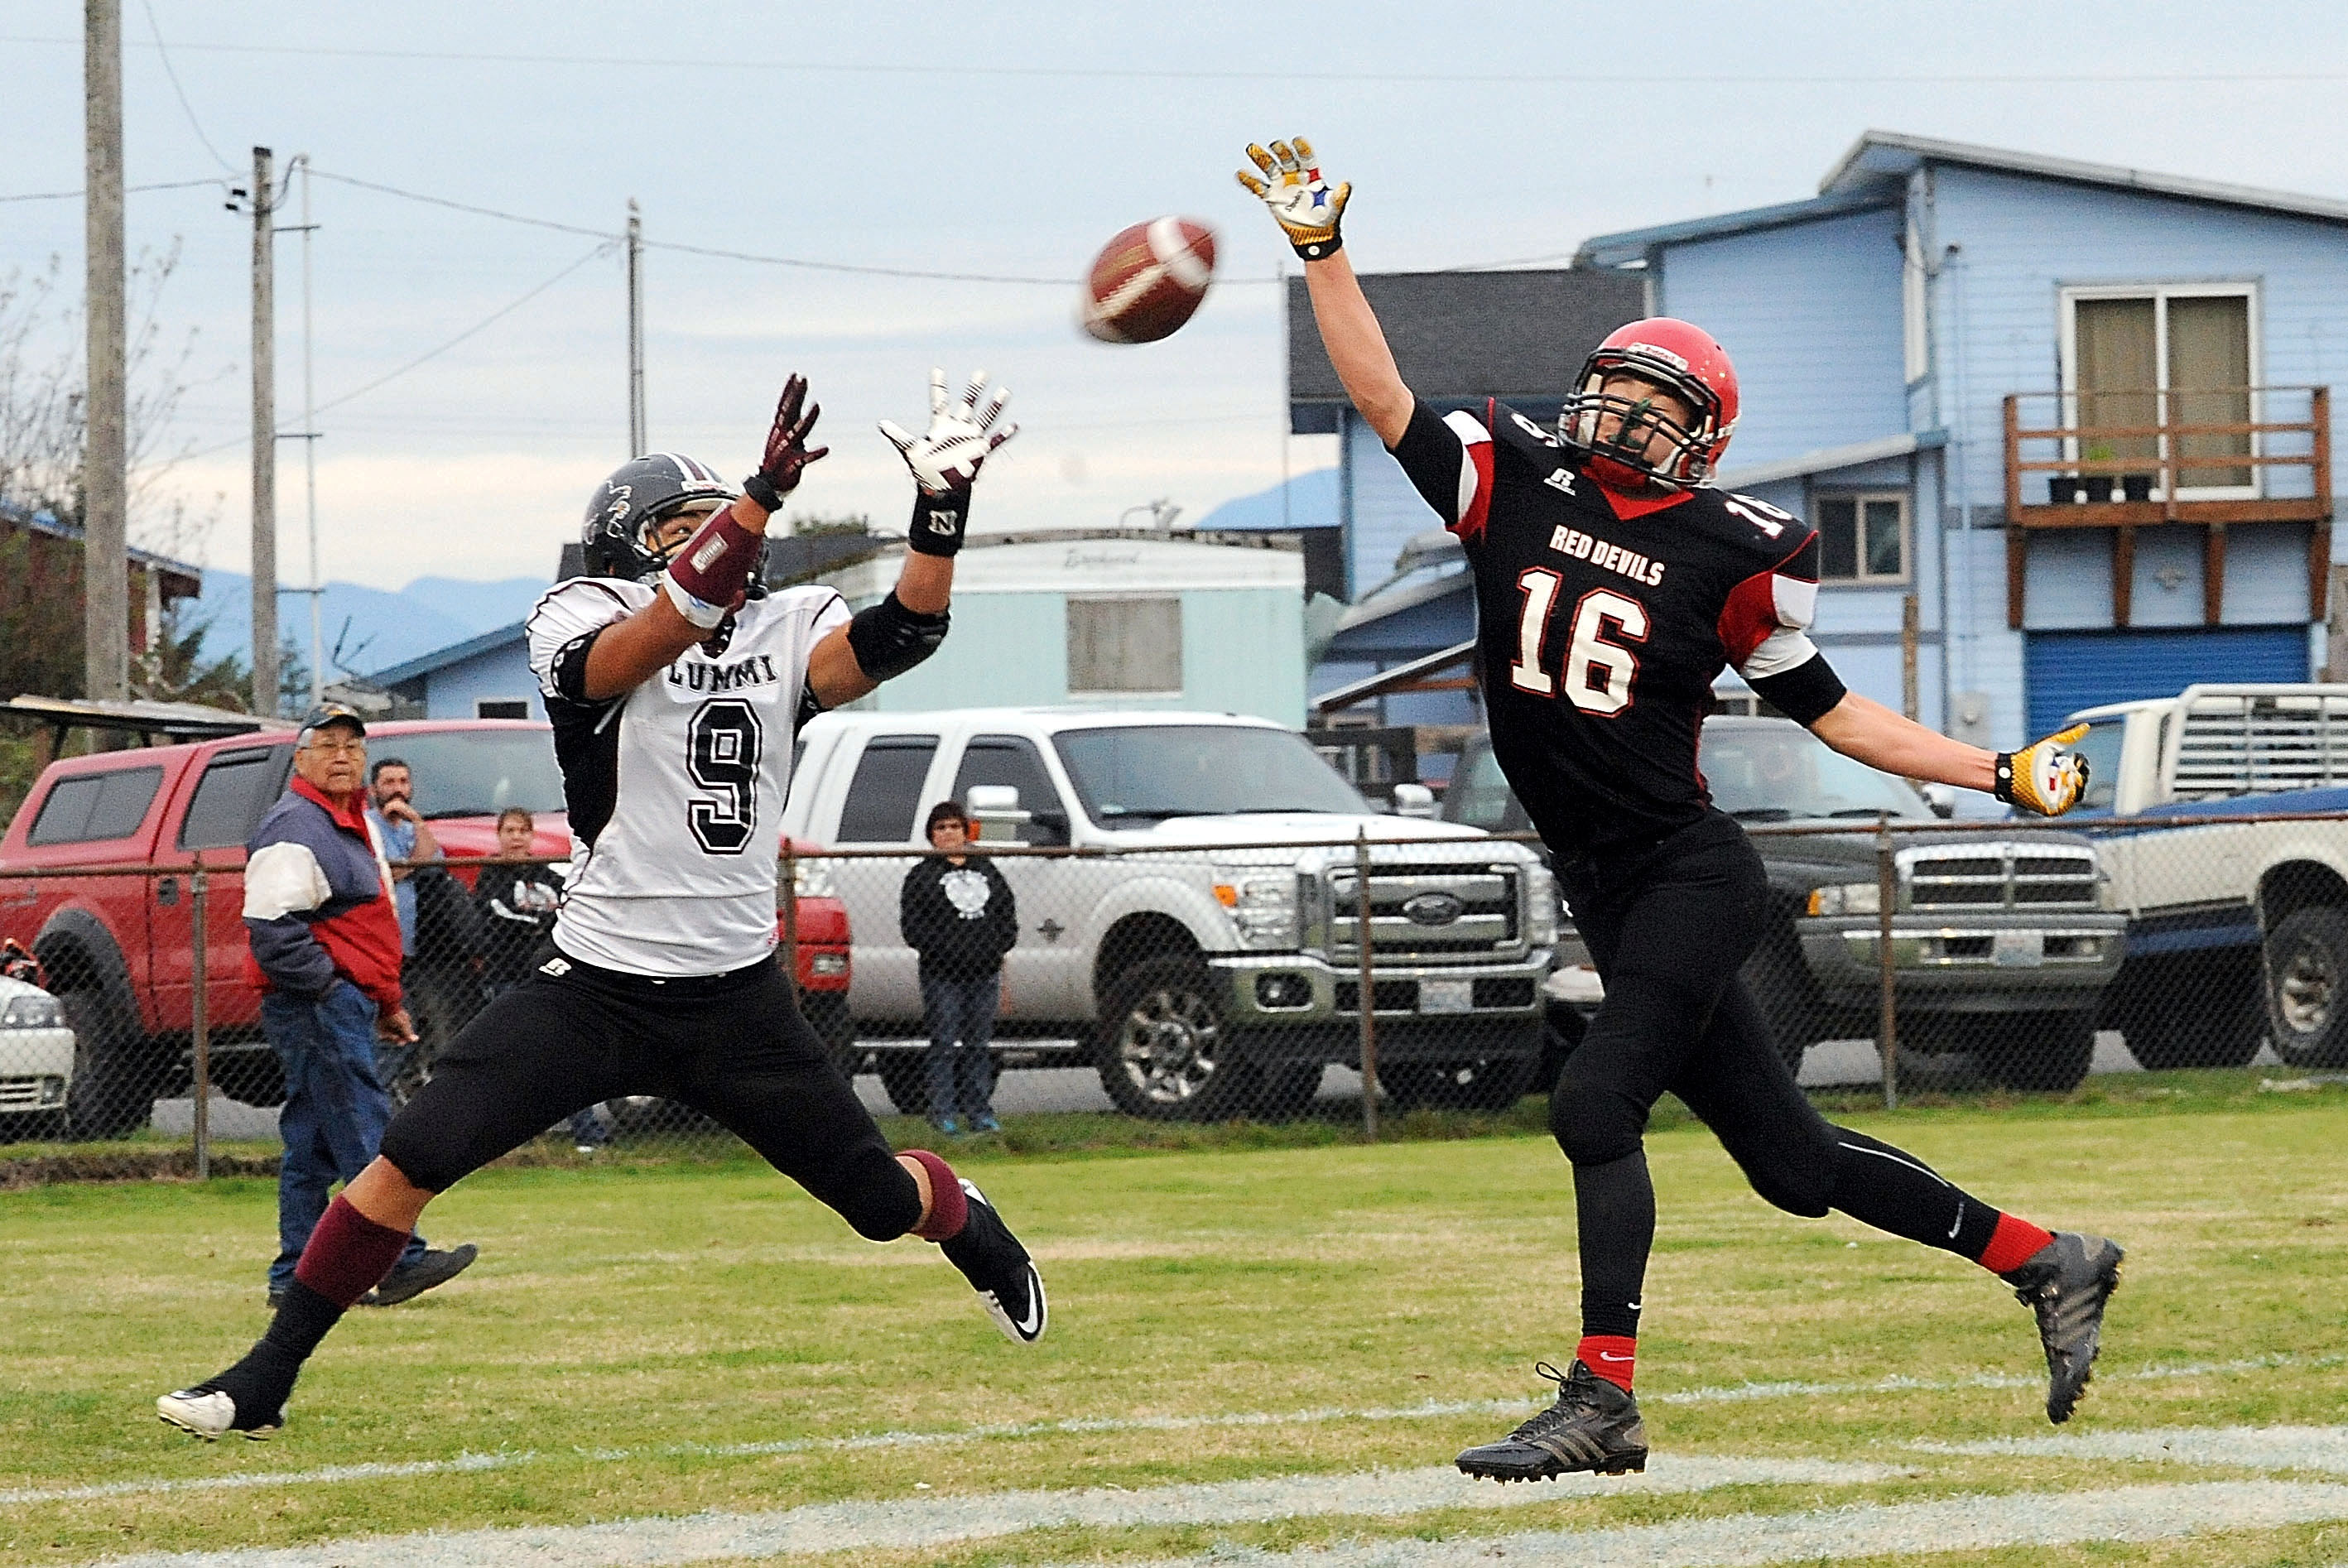 Neah Bay defensive back Cole Svec (16) attempts to knock down a pass intended for Lummi's Devin Cooper (9) during the Red Devils' 76-32 win over the Blackhawks in October at Neah Bay High School. Lonnie Archibald/for Peninsula Daily News